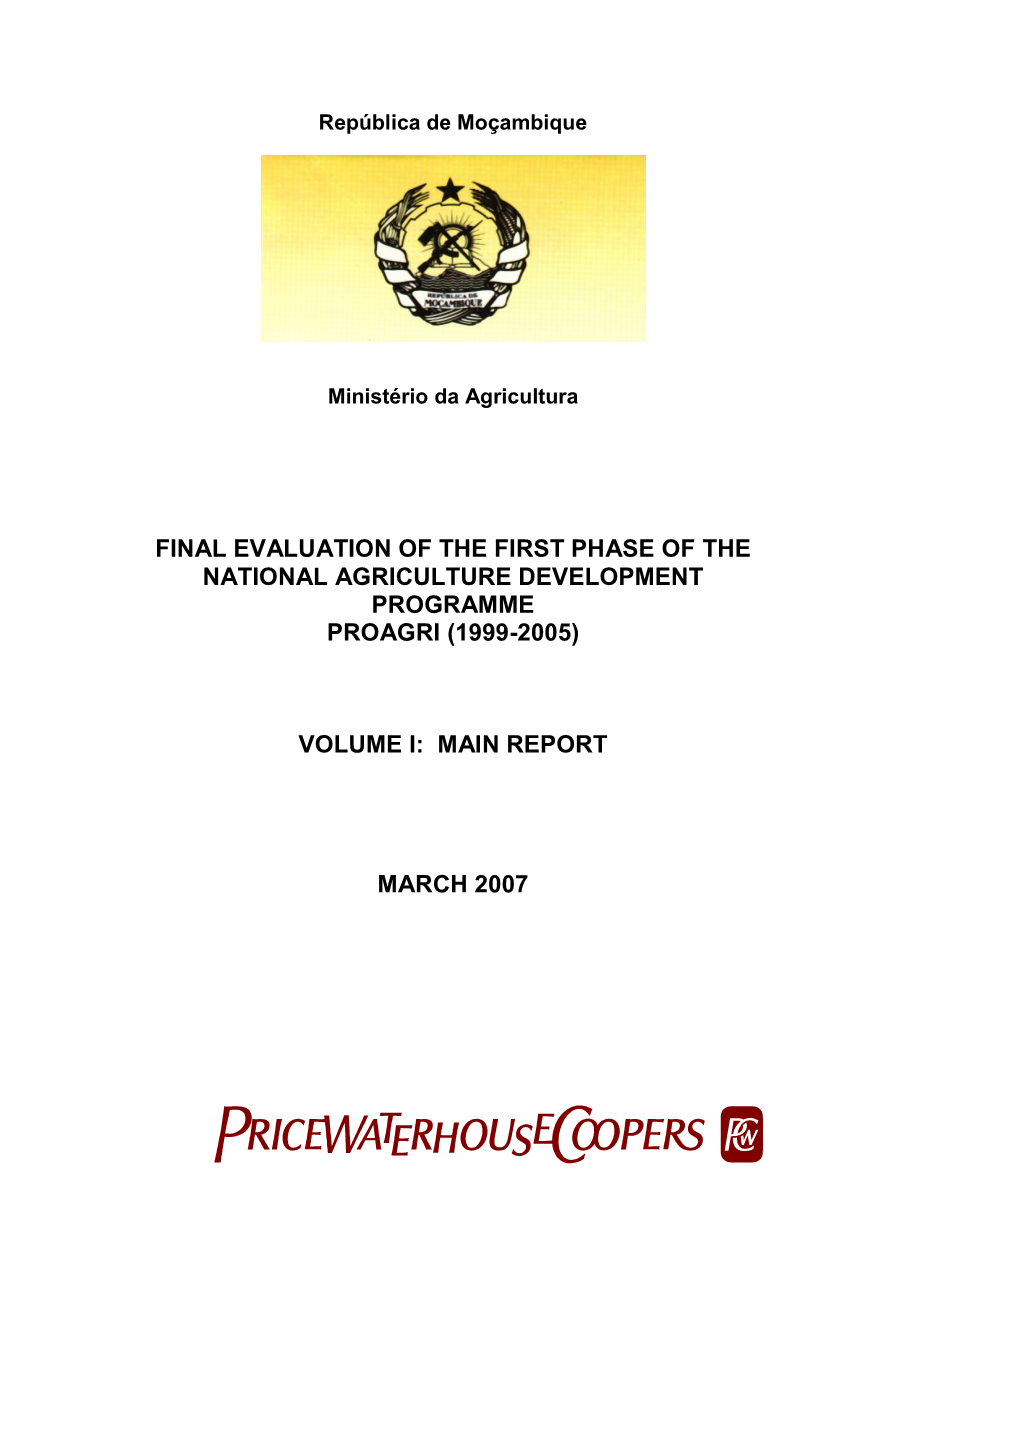 Final Evaluation of the First Phase of the National Agriculture Development Programme Proagri (1999-2005)